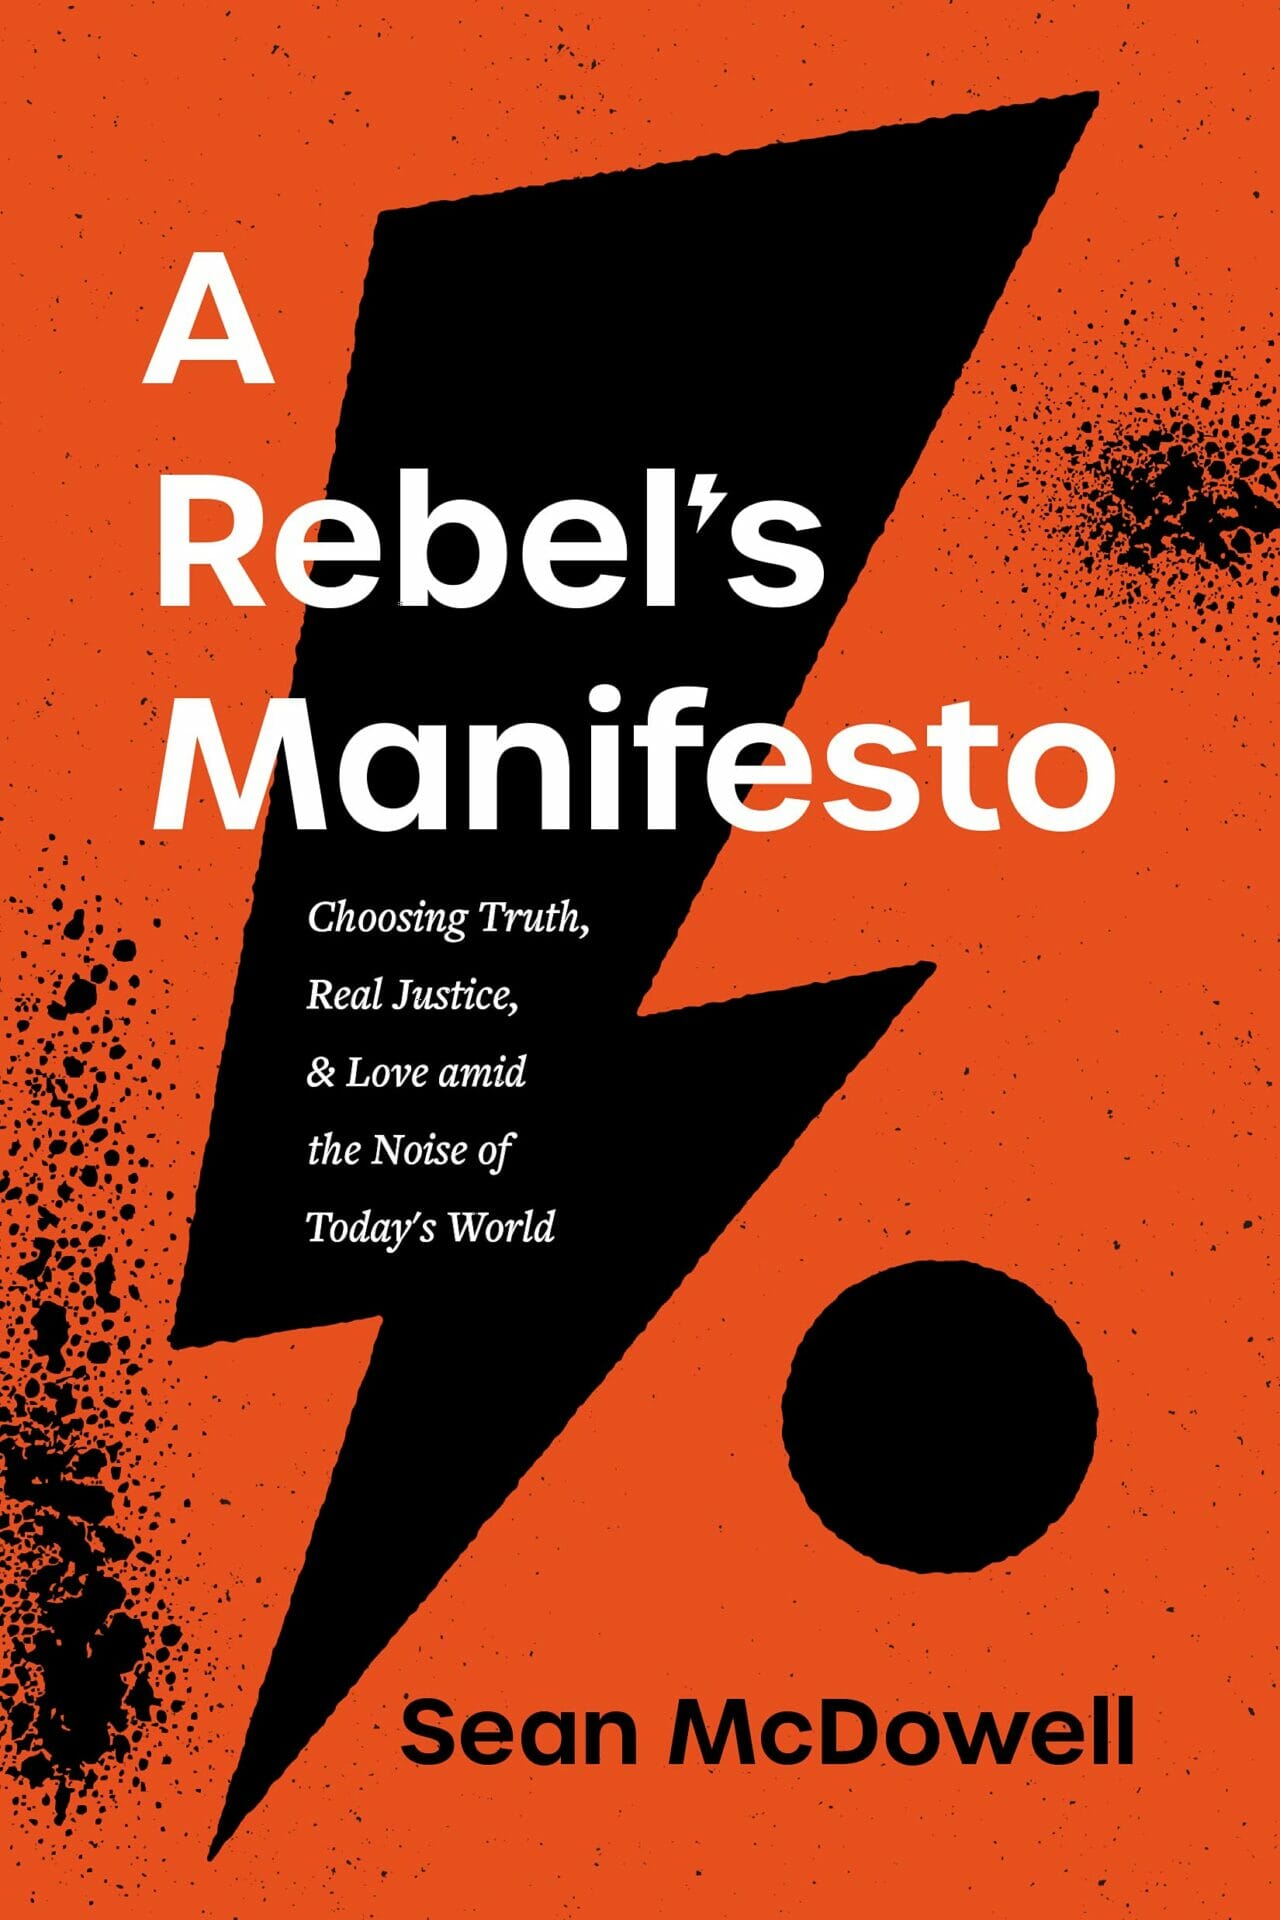 book cover A Rebel’s Manifesto by Sean McDowell